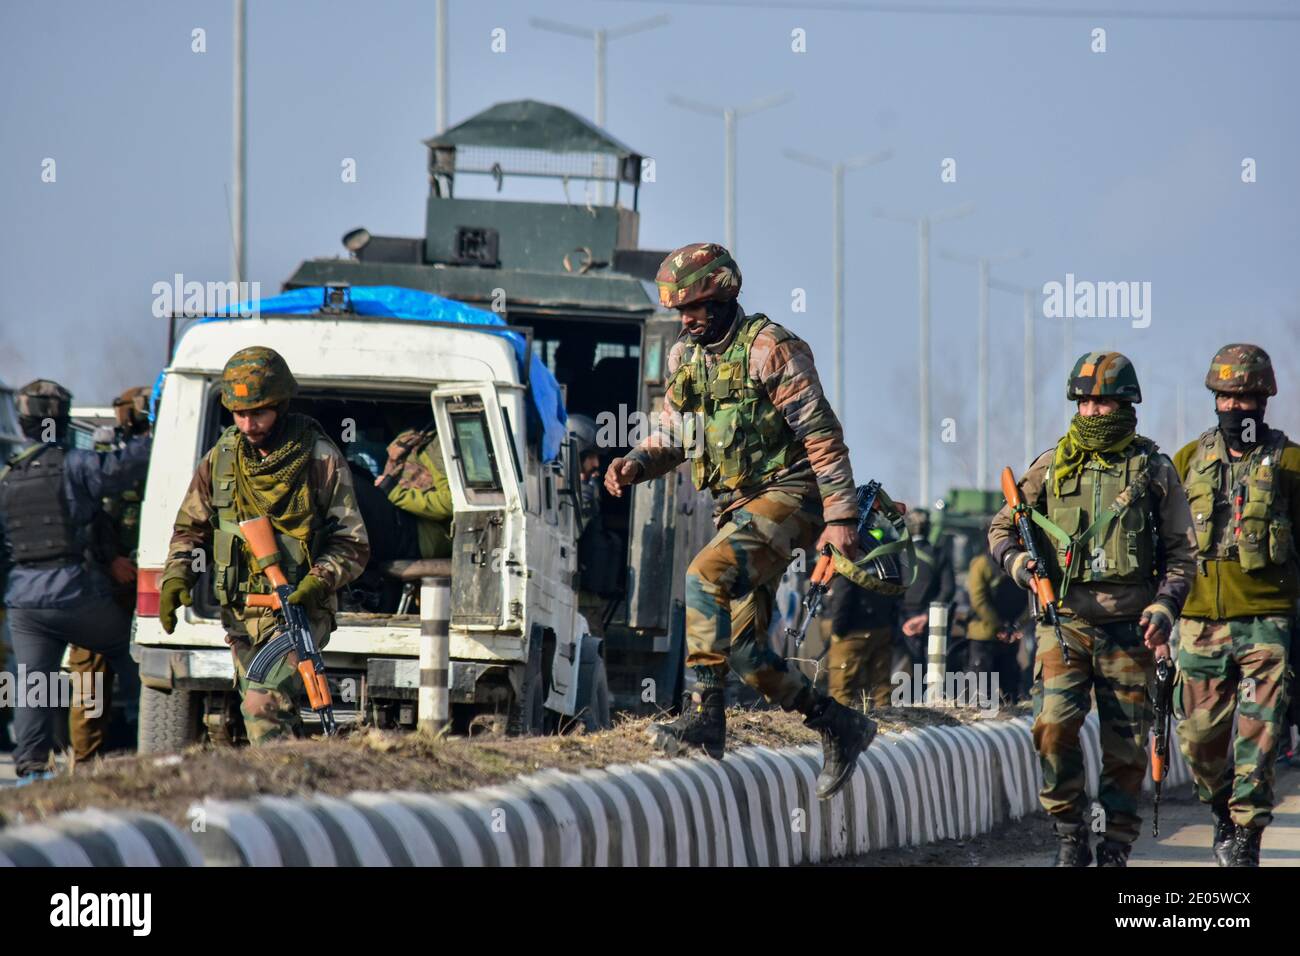 Indian army soldiers walk towards the gun battle site on the outskirts of Srinagar. Three militants were killed in an overnight gun battle with government forces in Lawaypora area of Srinagar. The militants killed were planning a big strike on the Srinagar-Muzaffarabad highway, an official said. Stock Photo